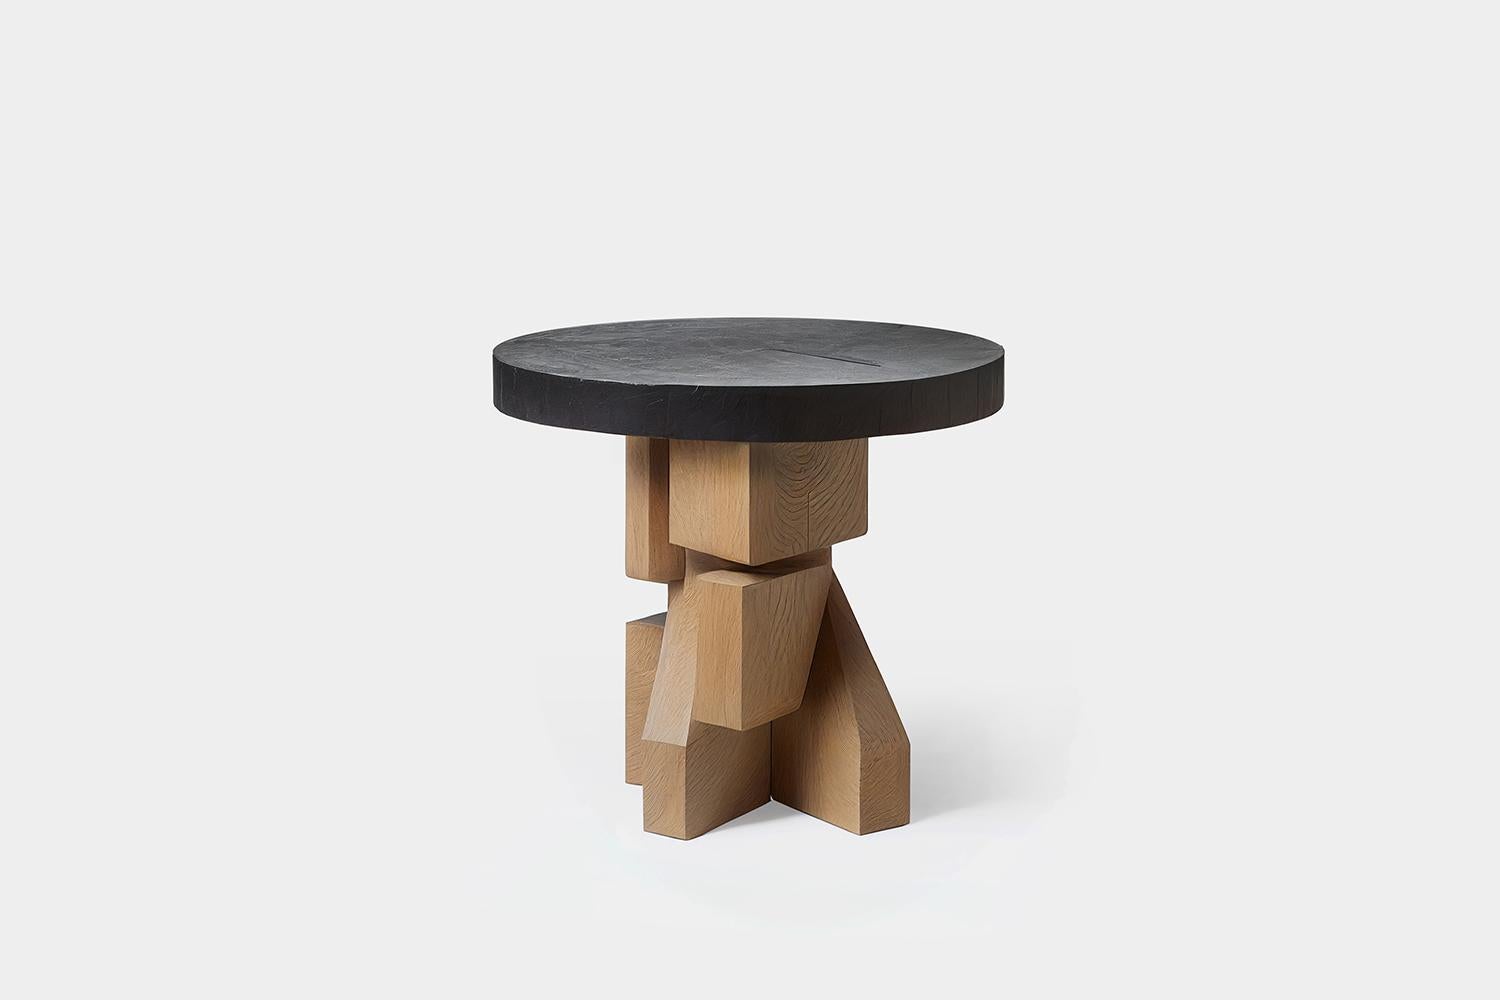 Hand-crafted solid thick oak side table with faceted base and black round table top. 
Product made to order; some variances may apply to the final piece. 

——

NONO is a Mexican design brand with more than 10 years of experience dedicated to